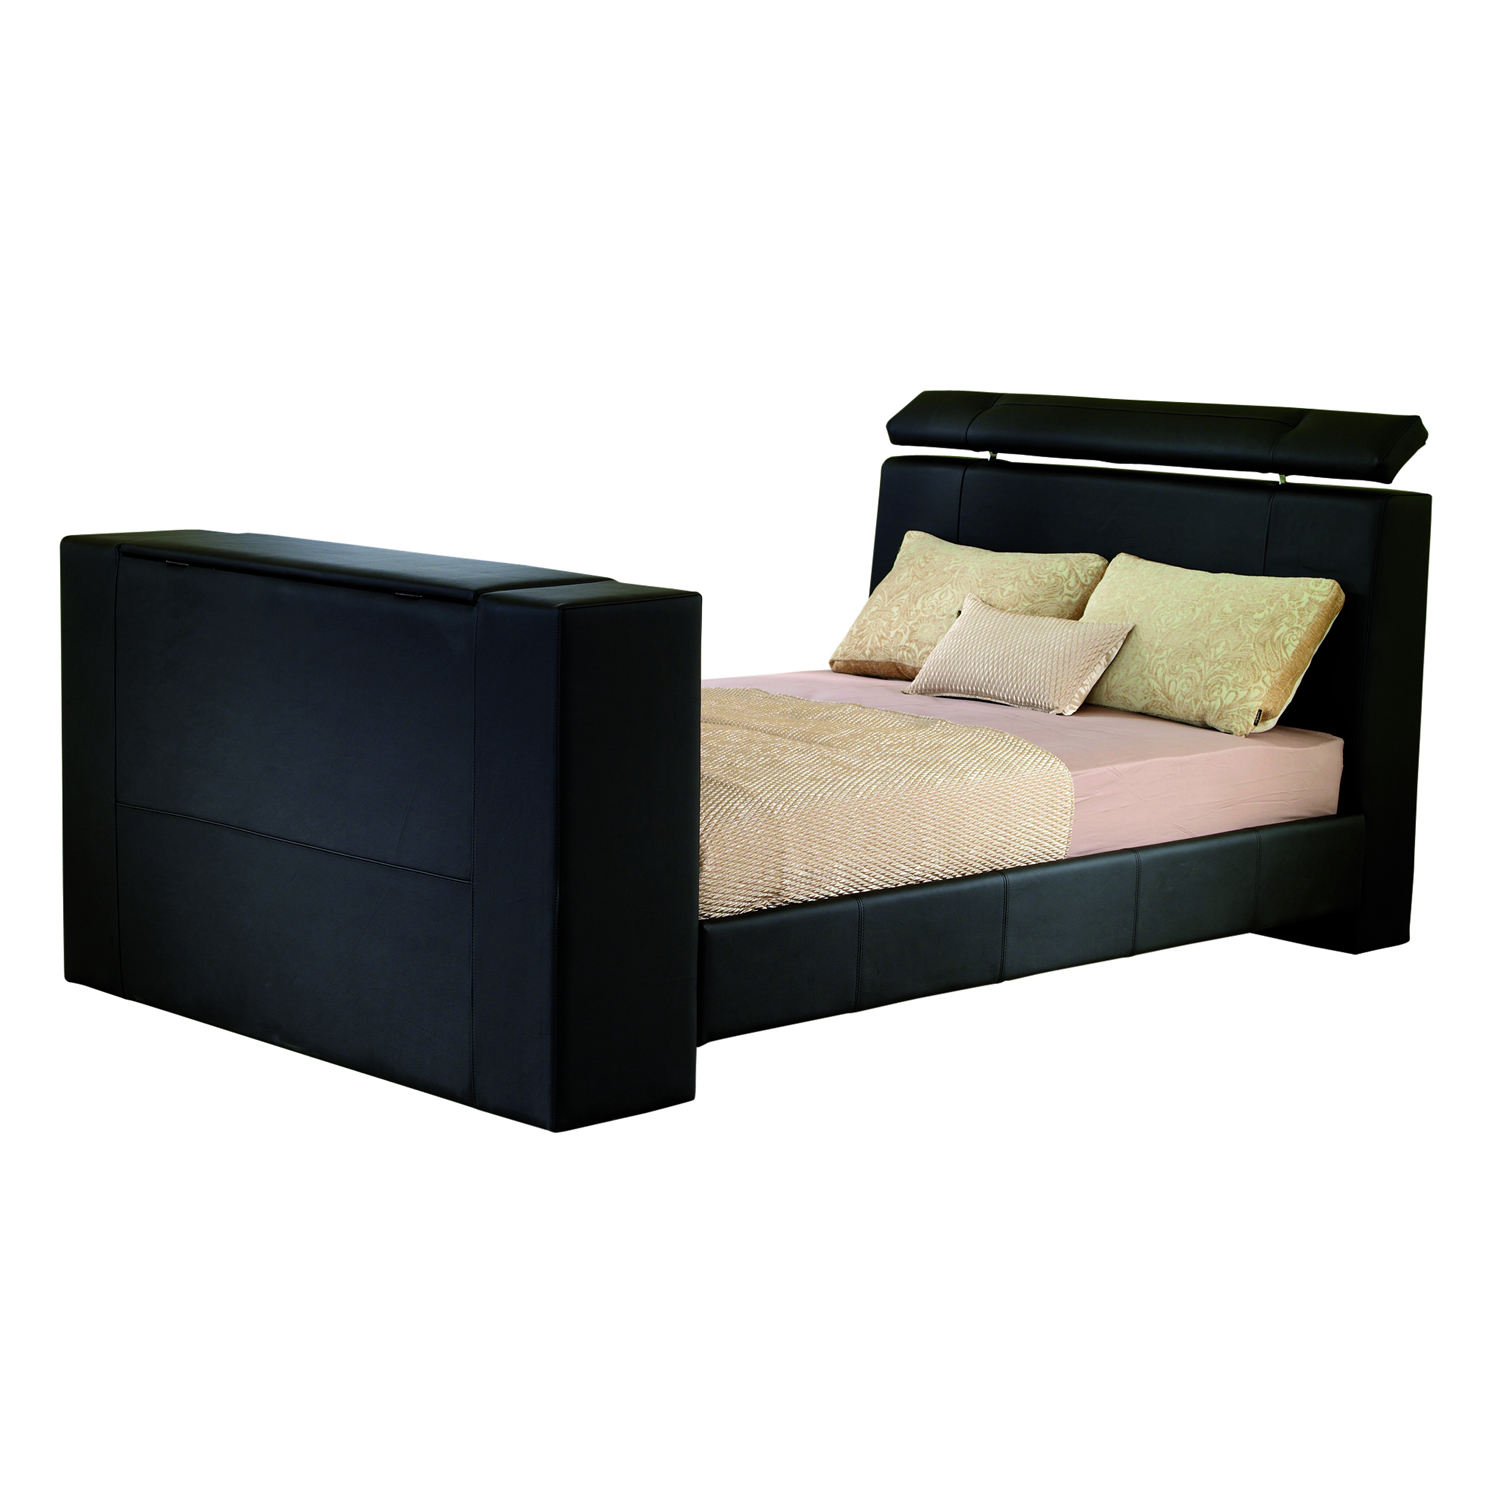 Image of Ambers International Manhattan Real Leather TV Bed